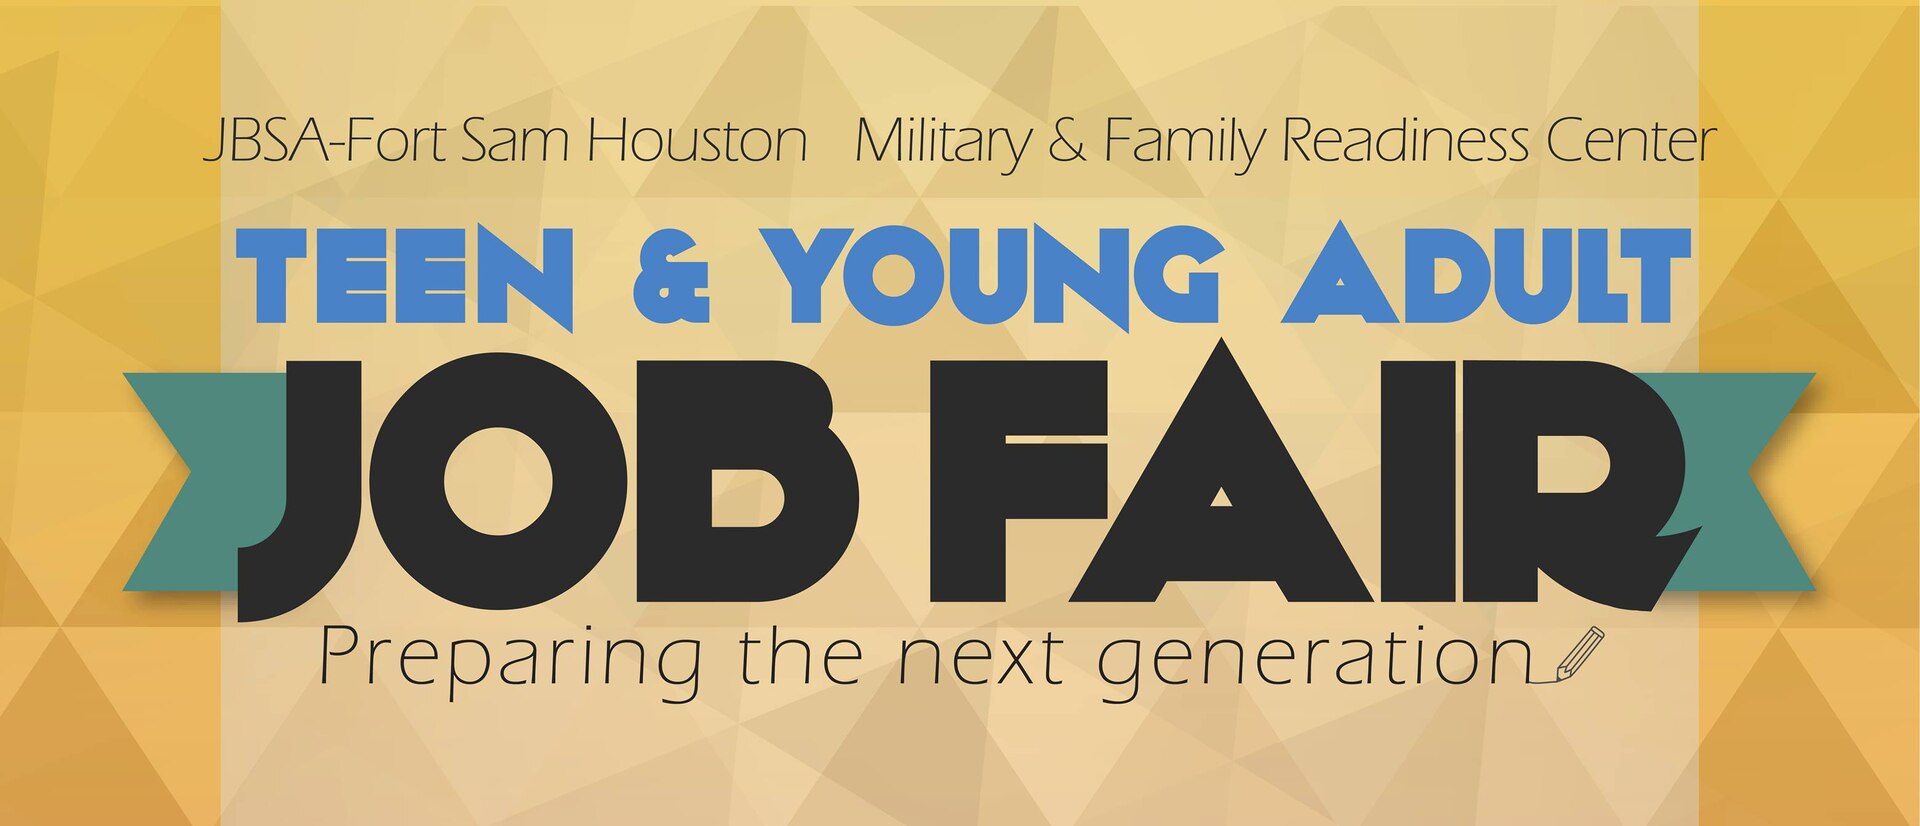 Preparing the Next Generation is the theme of this year’s Joint Base San Antonio Employment Readiness Program Teen and Young Adult Job Fair being held virtually May 8-15.